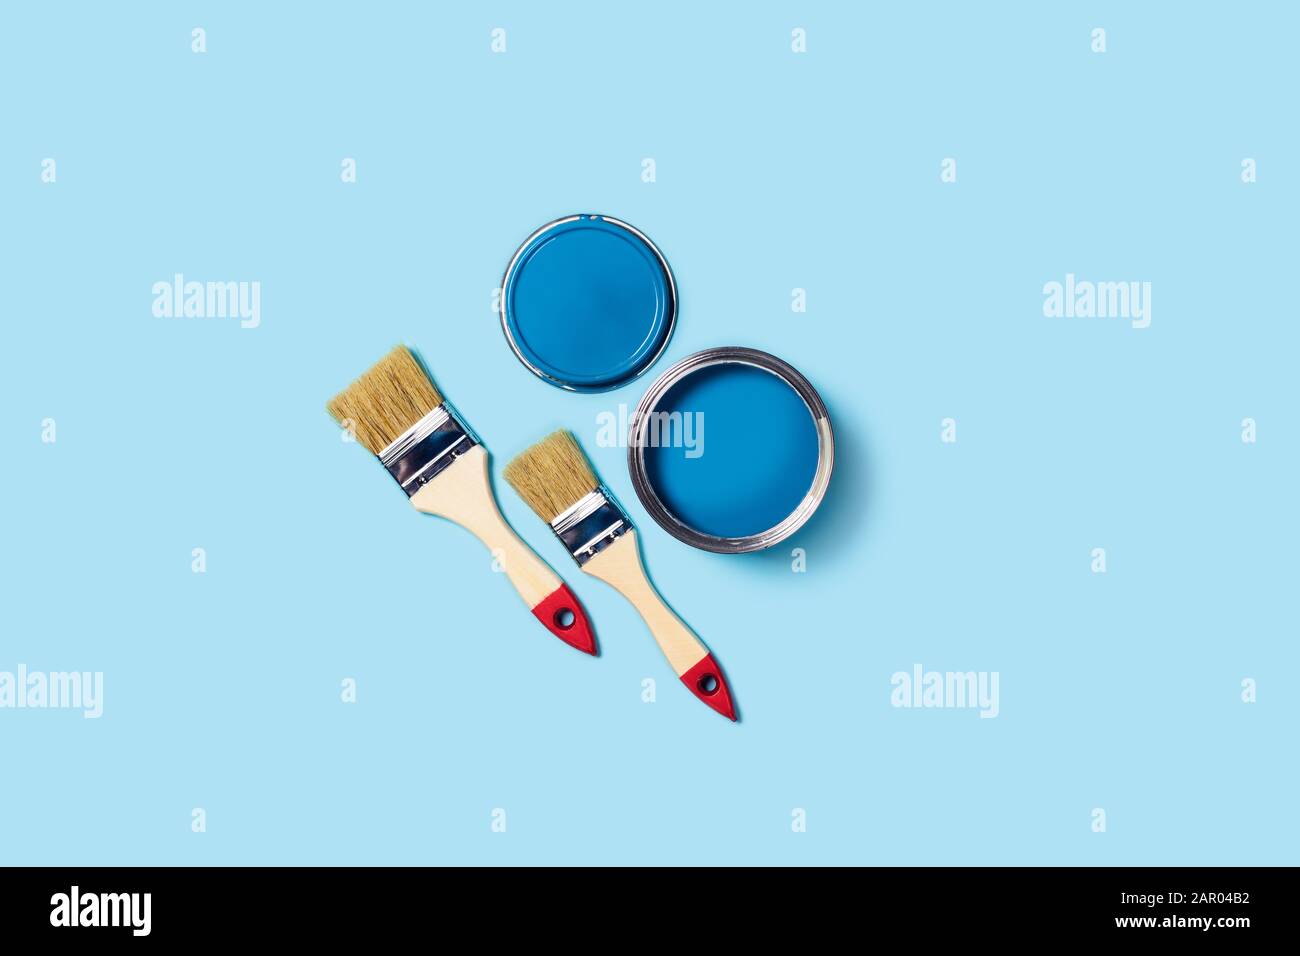 Photo for apartment repairs. Blue background with paint and two wooden tassels. Stock Photo